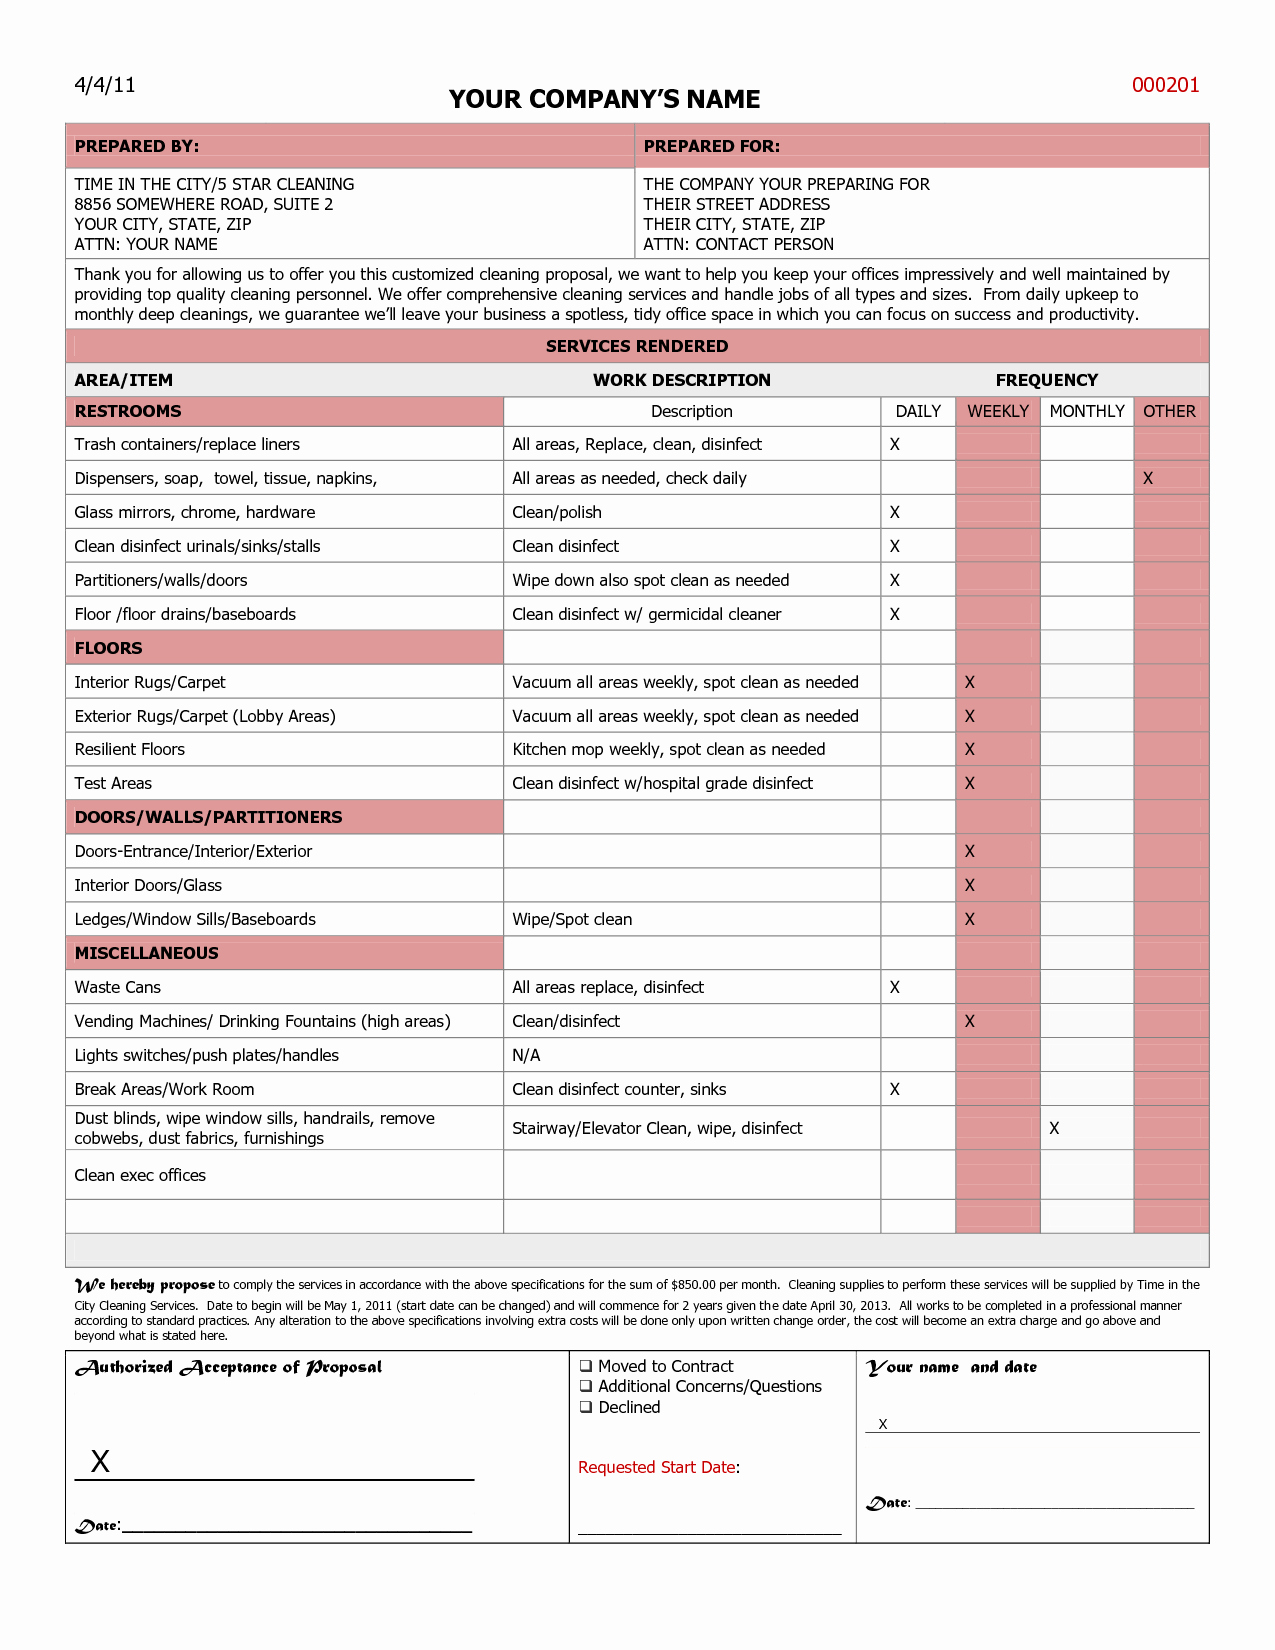 Commercial Cleaning Proposal Template Free Unique Janitorial Bid Proposal Template